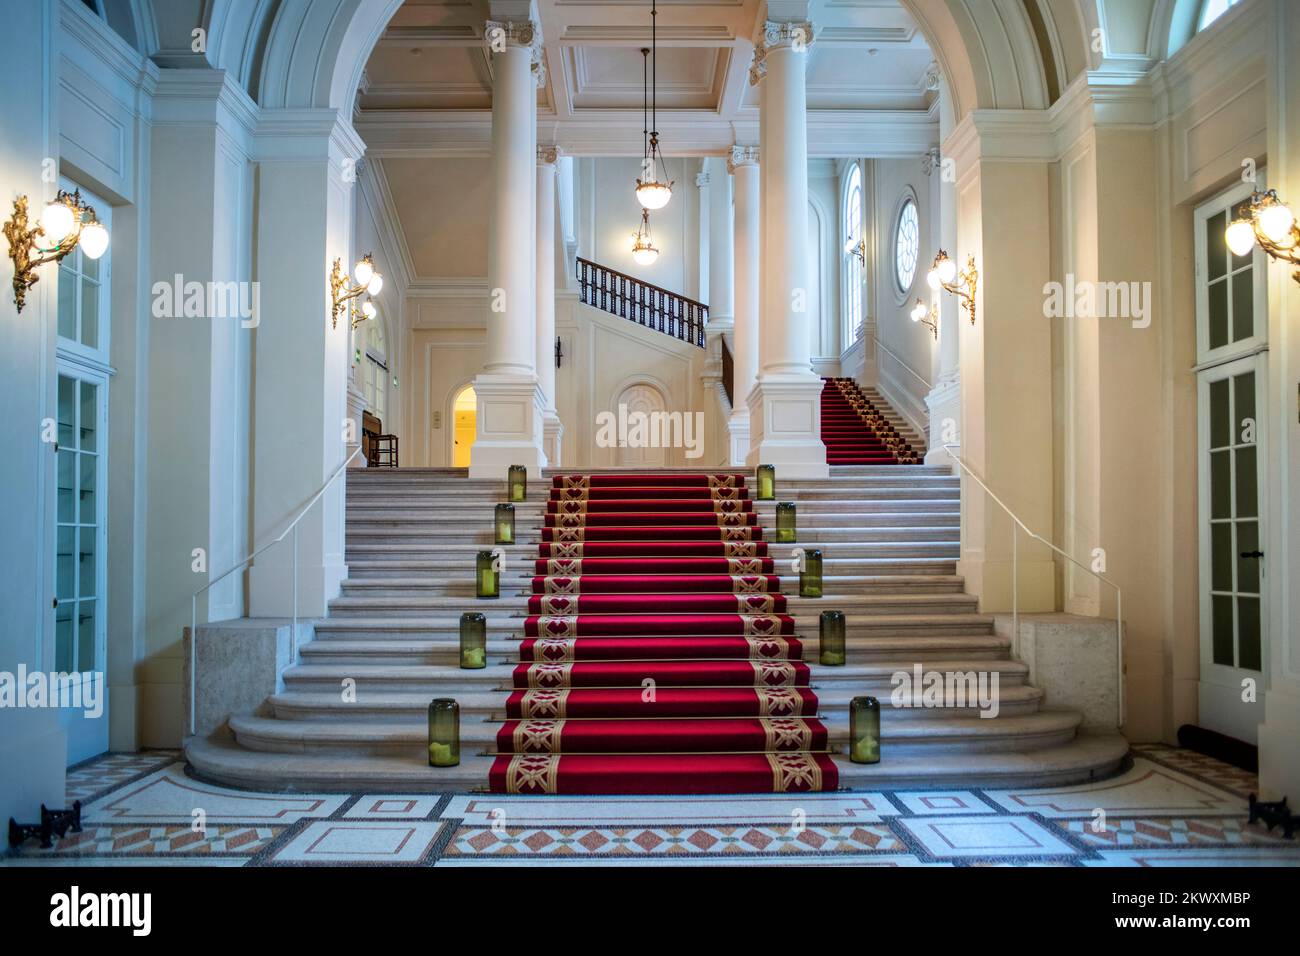 Inside Palais Coburg, also known as Palais Saxe-Coburg, It was owned by the Kohary branch of the House of Saxe-Coburg and Gotha, Vienna, Austria.  Pal Stock Photo